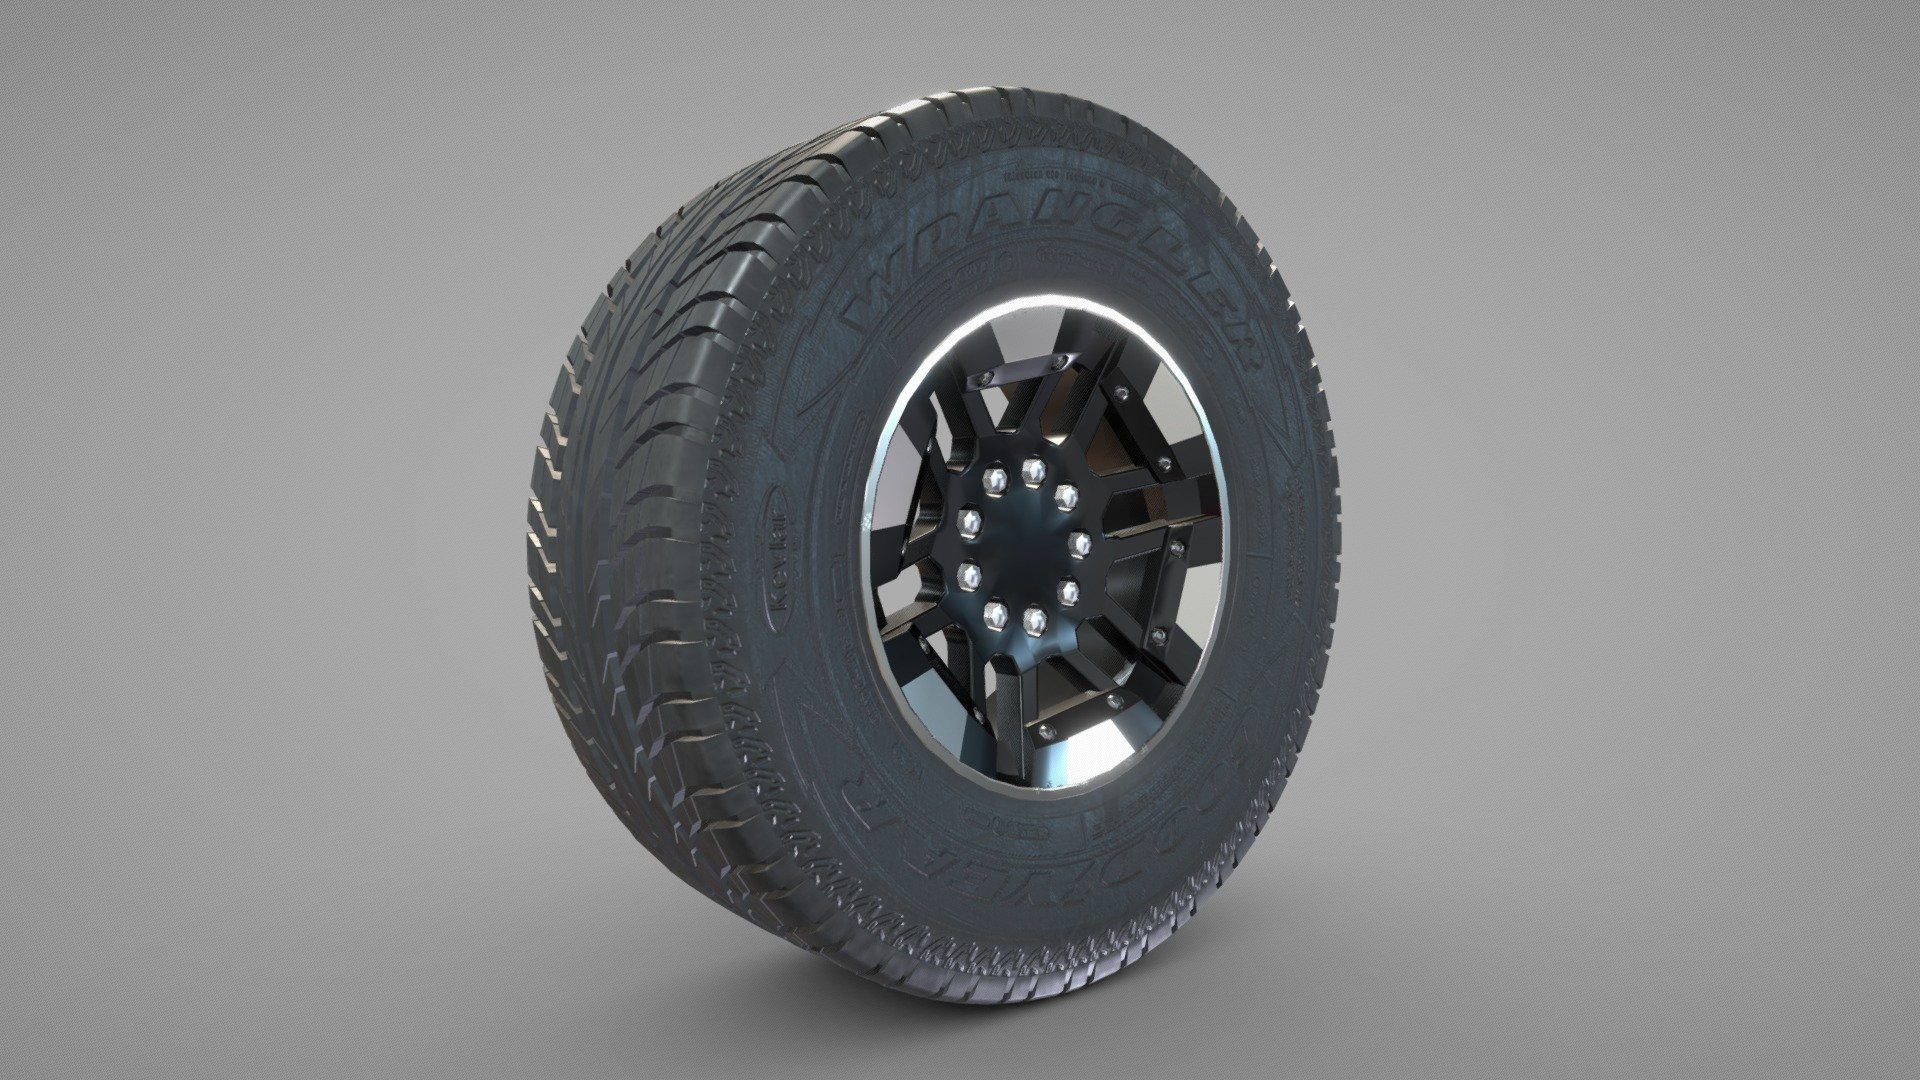 Lowpoly whell for SUV     faces: 11166 -tris: 21412  - verts: 11354 
formats: blender 2.91 (native)- 3dmax 2016 - FBX -OBJ -DAE -STL (PRINTABLE)
Texture list: tire (base color - height -metallic -mixed ambient oclussion -normal -norml openGL -roughness ) rim (base color - height -metallic -mixed ambient oclussion -normal -norml openGL -roughness )
Cleaneed geometry, all faces positive orientation - Wheel Hummer rim+tyre with textures - Buy Royalty Free 3D model by ArqRafaelLugo (@rafaelugo20) 3d model